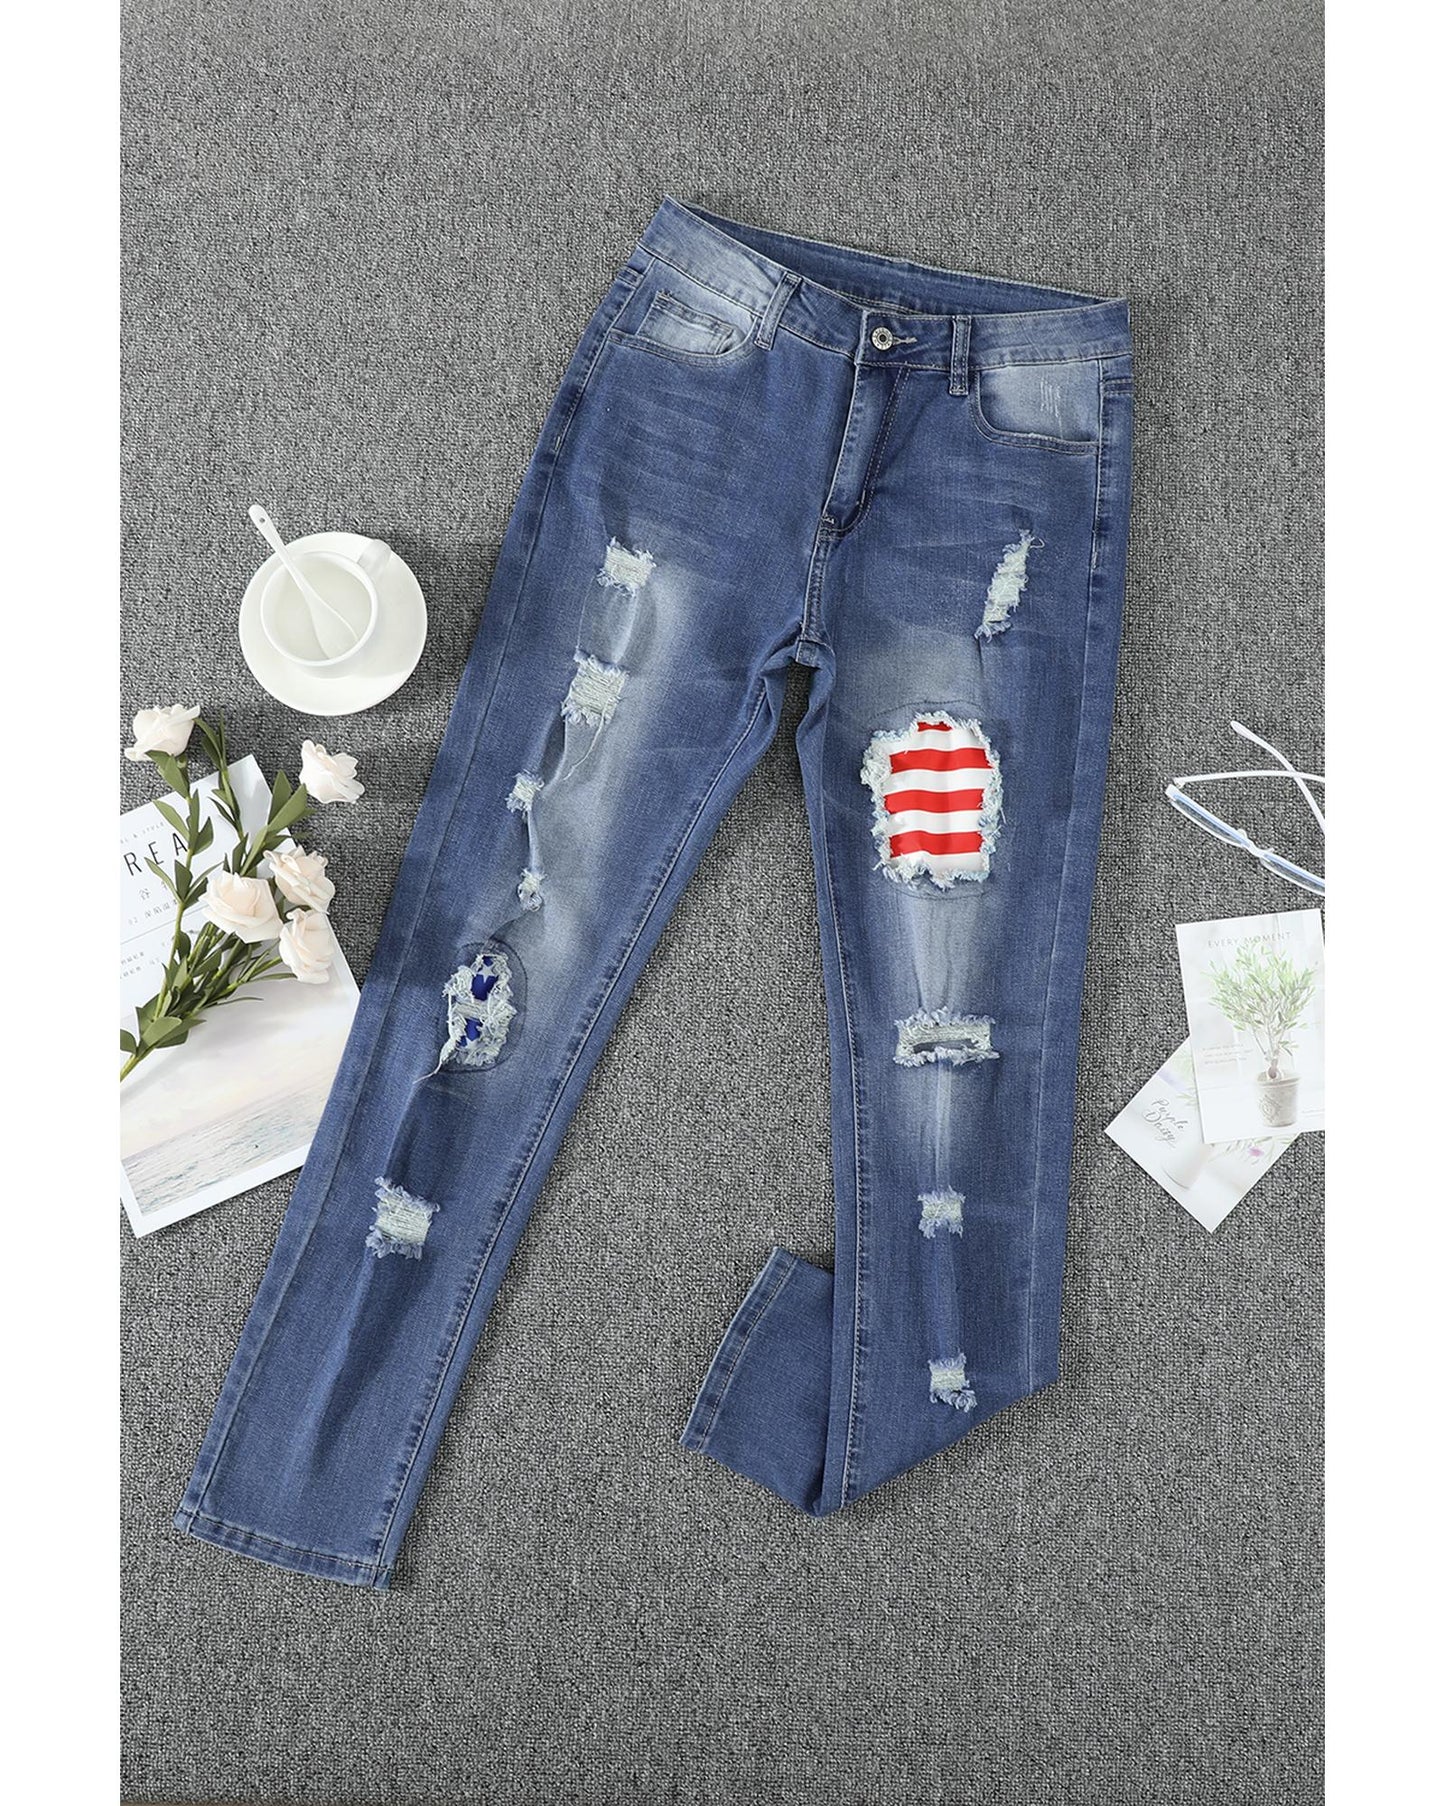 Azura Exchange Stripes and Stars Patches Ripped Jeans - L